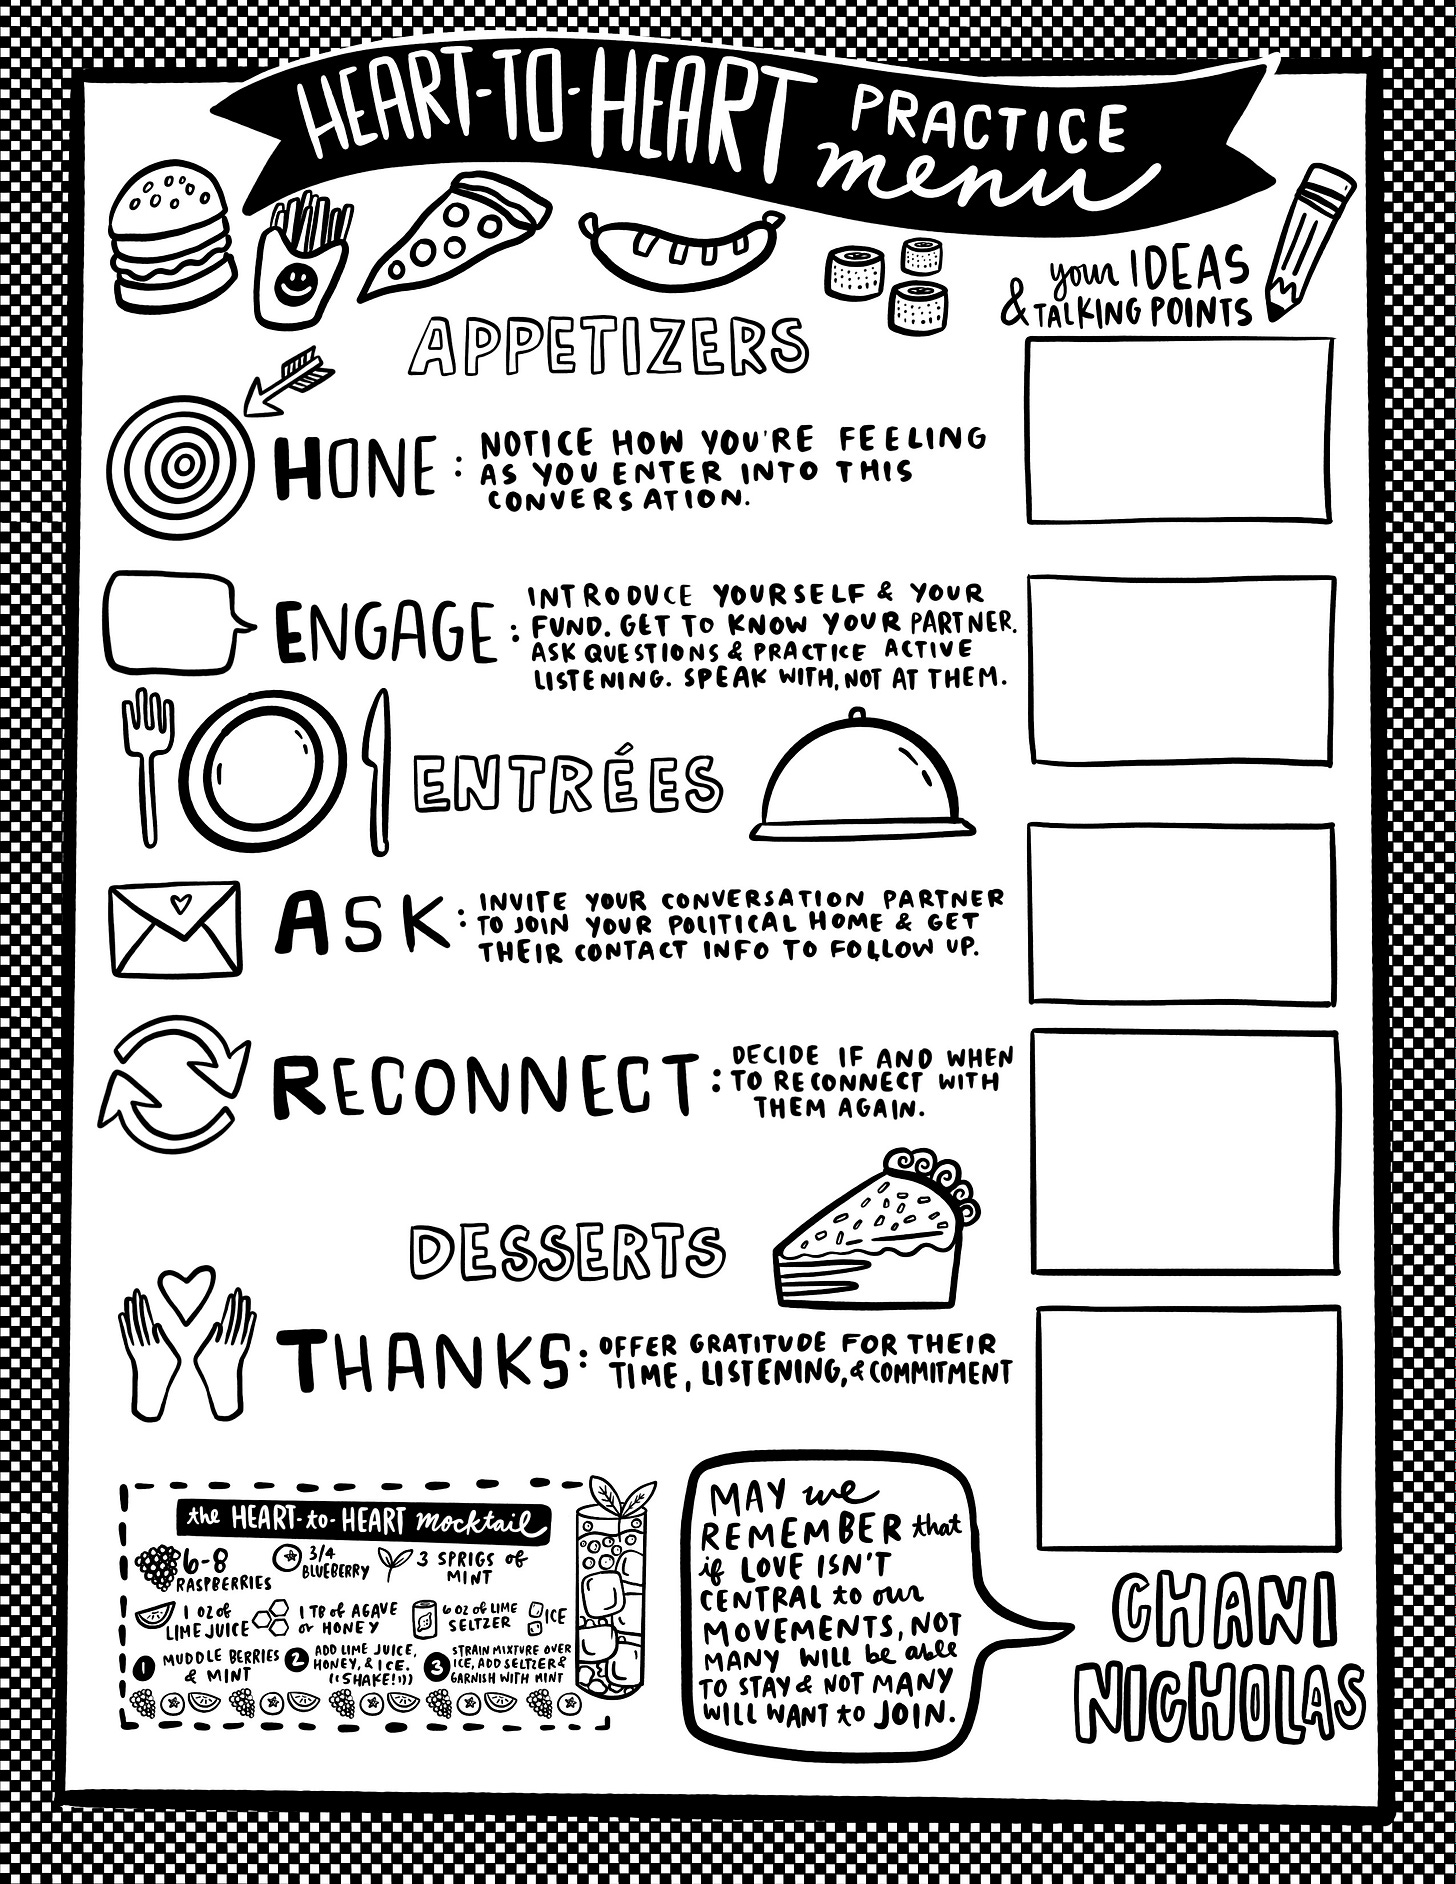 A hand-drawn illustrated worksheet made to look like a diner menu on talking about abortion